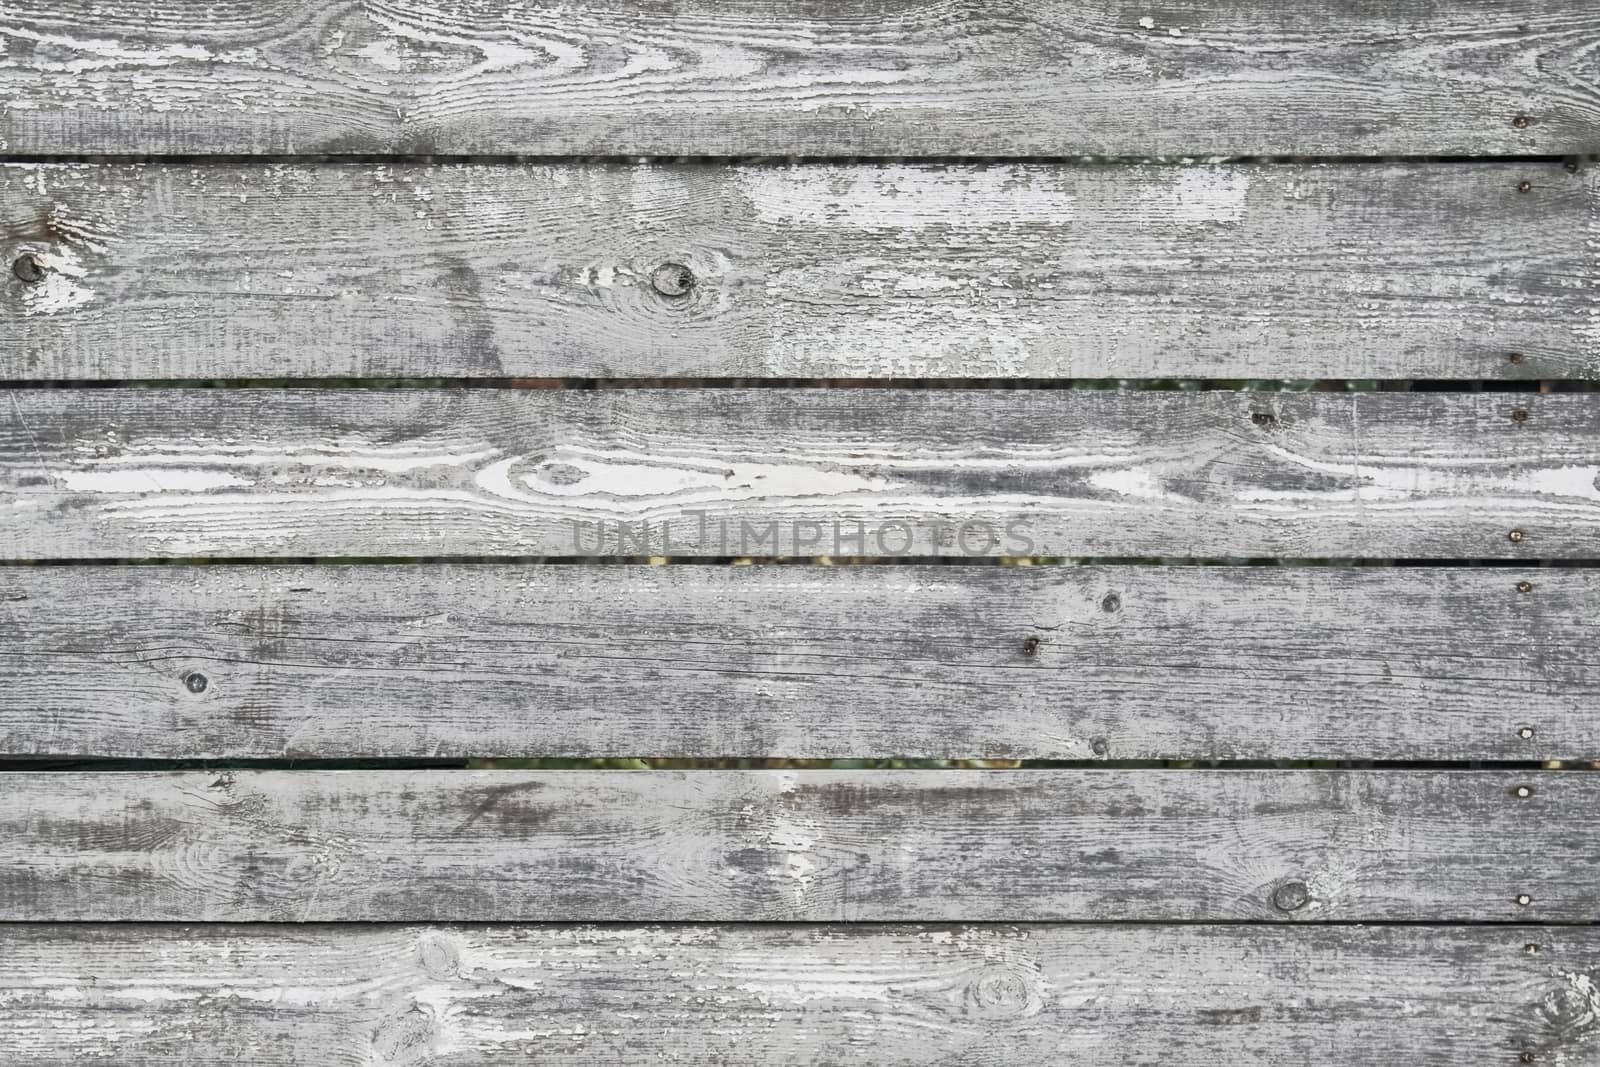 Fence wooden gray with the peeled-off white paint texture of a tree